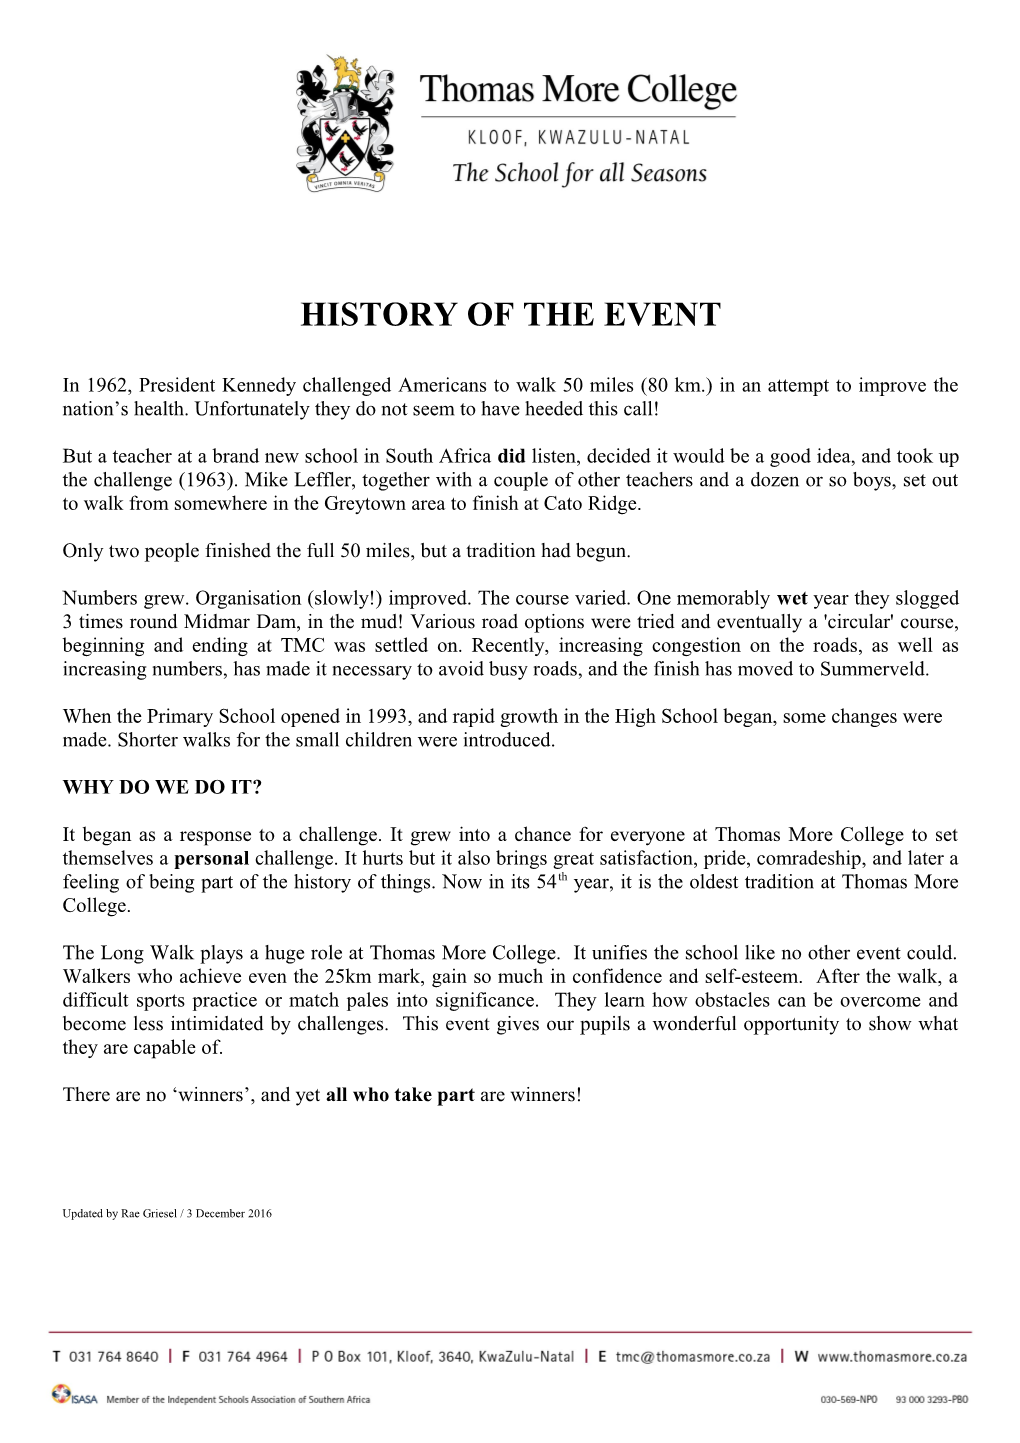 History of the Event